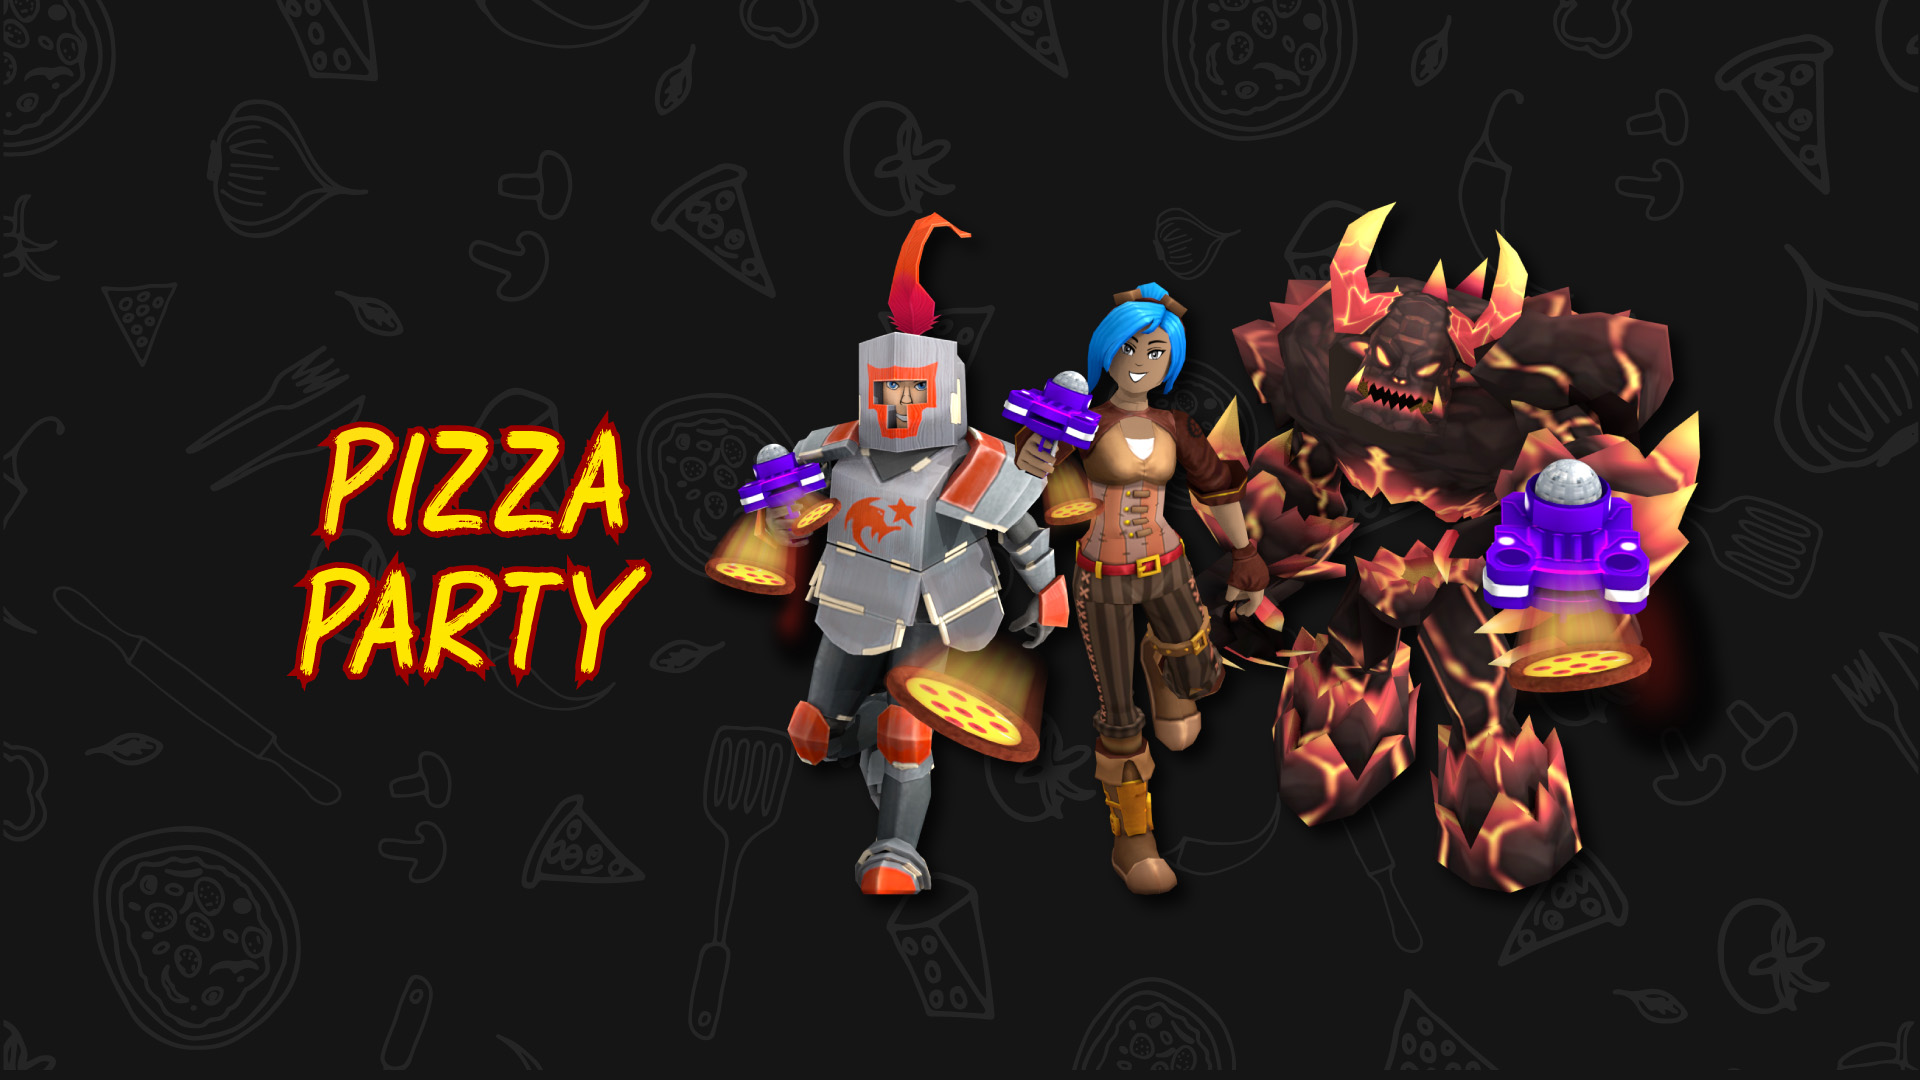 Pizza Party Event Work At A Pizza Place Wiki Fandom Powered By Wikia - pizza party event